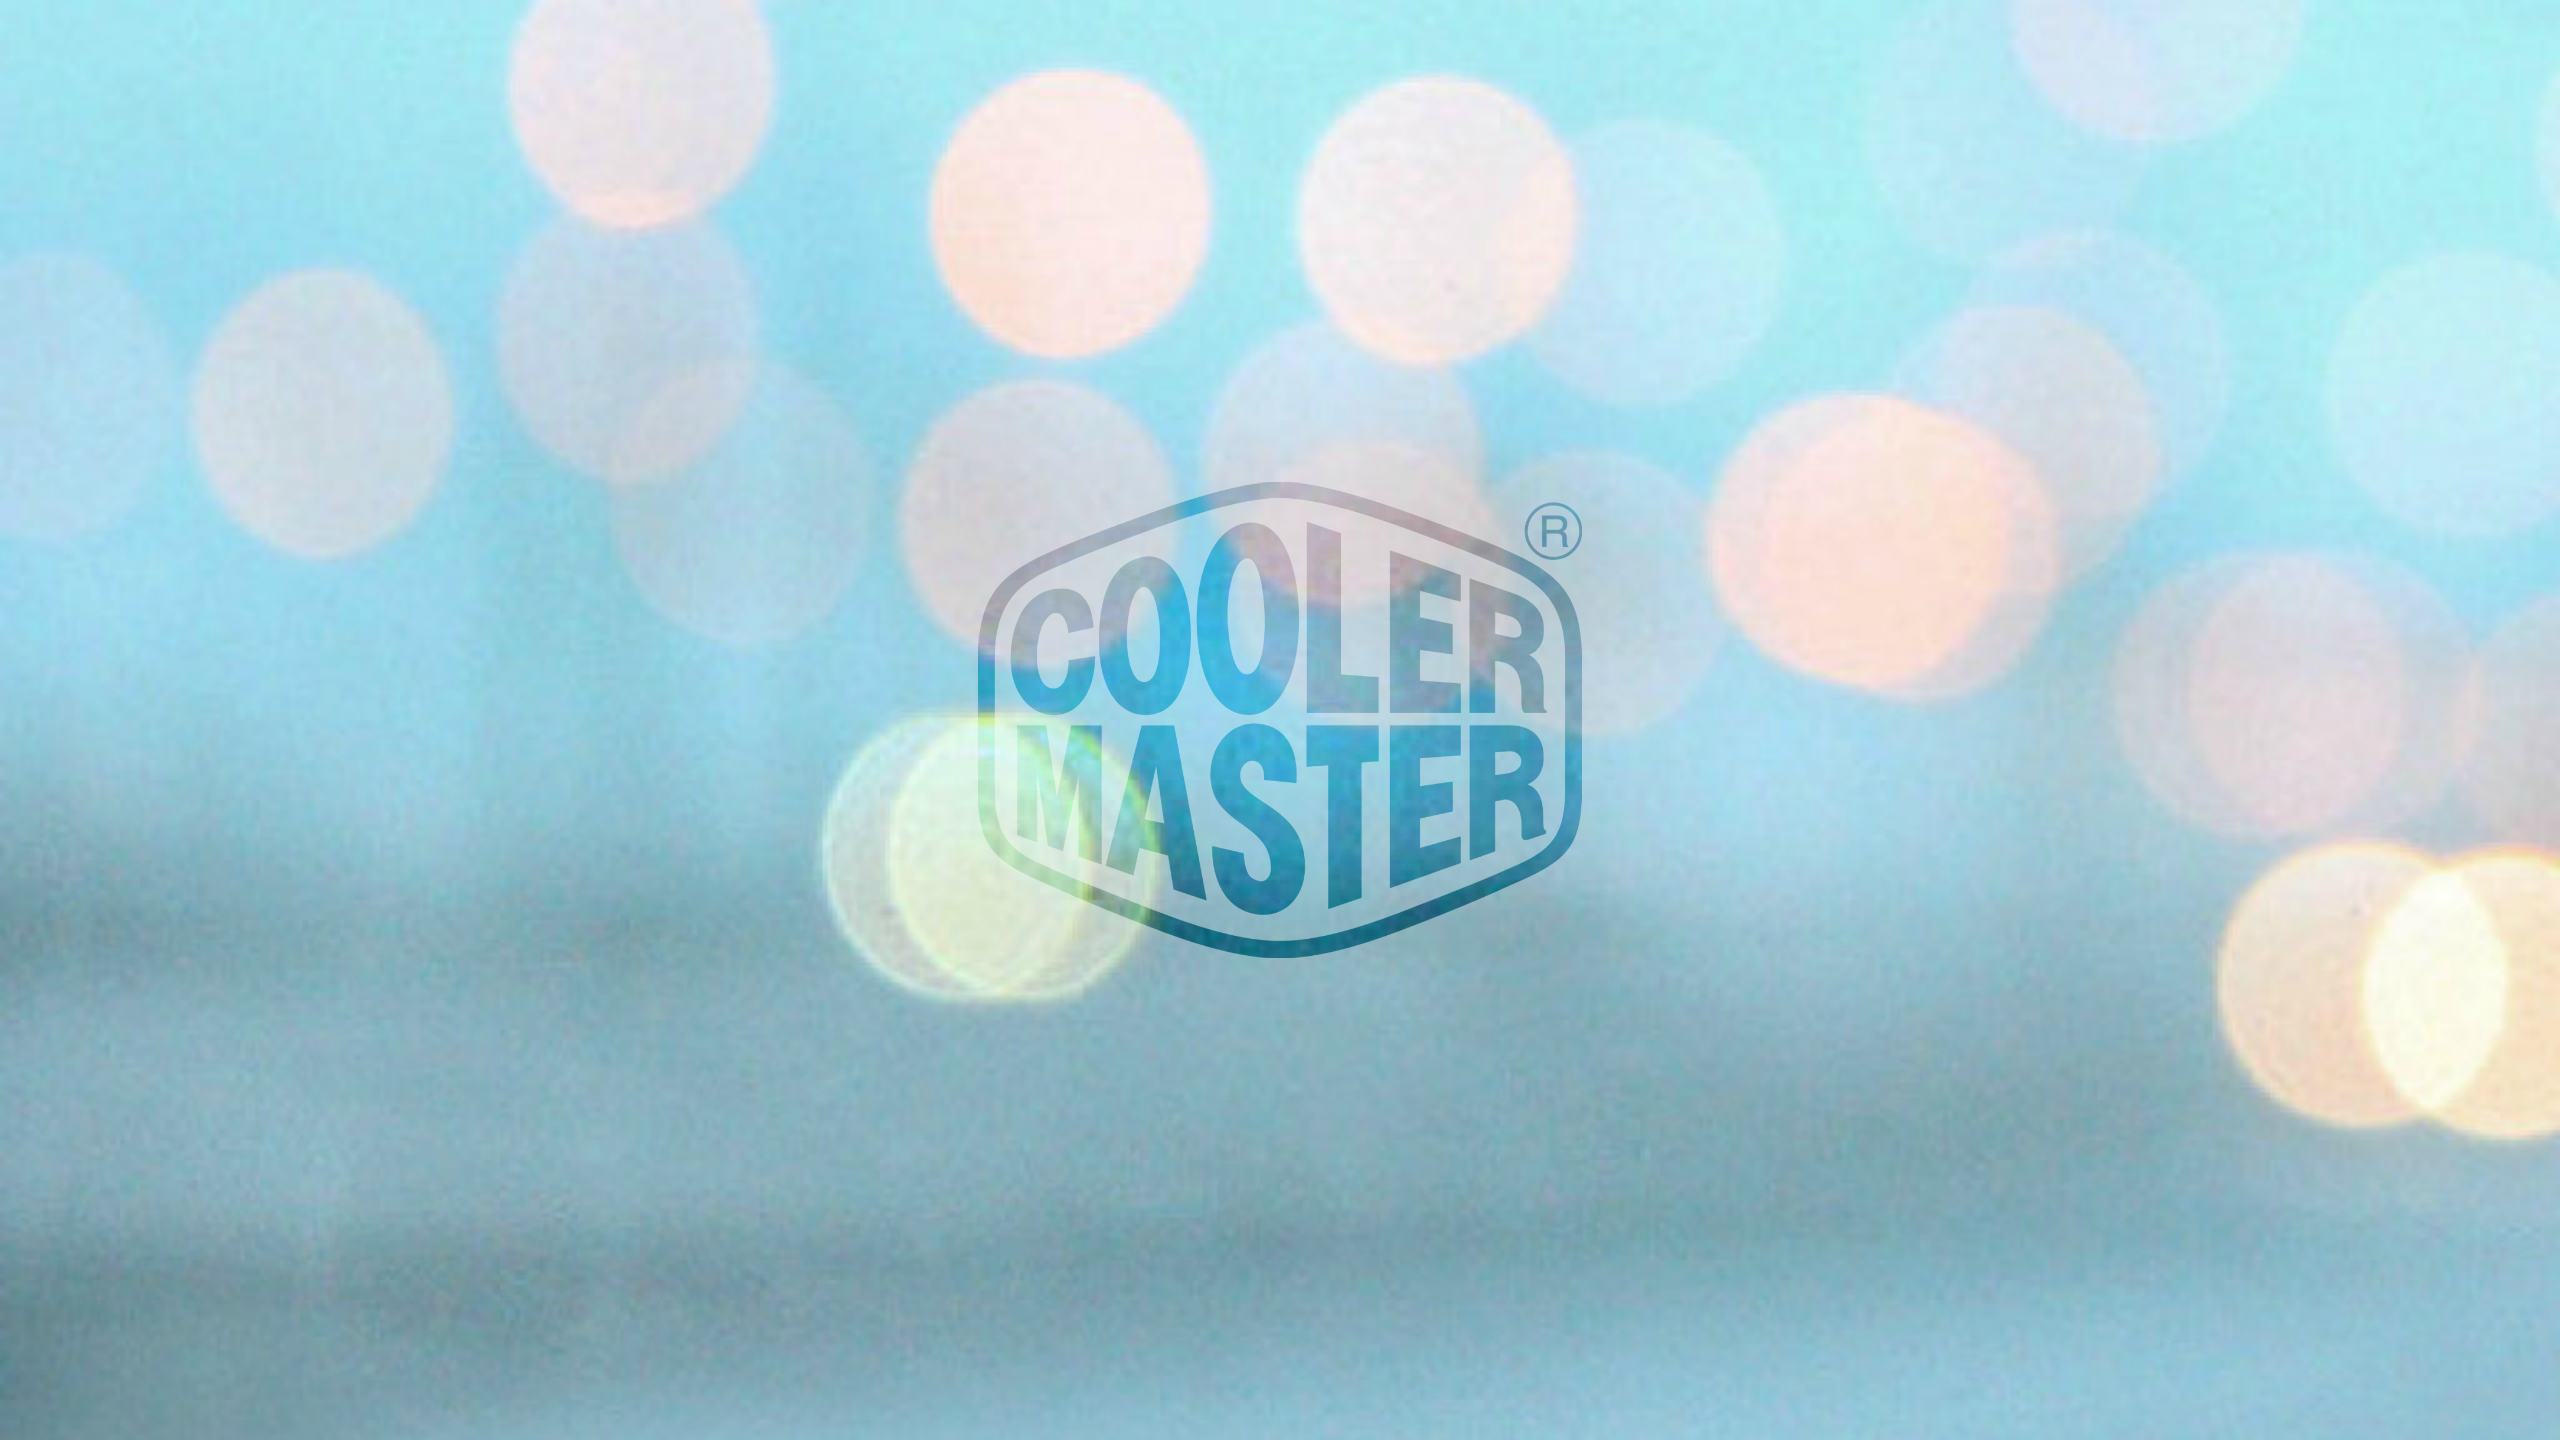 Cooler Master Bokeh Wallpaper By Donnesmarcus